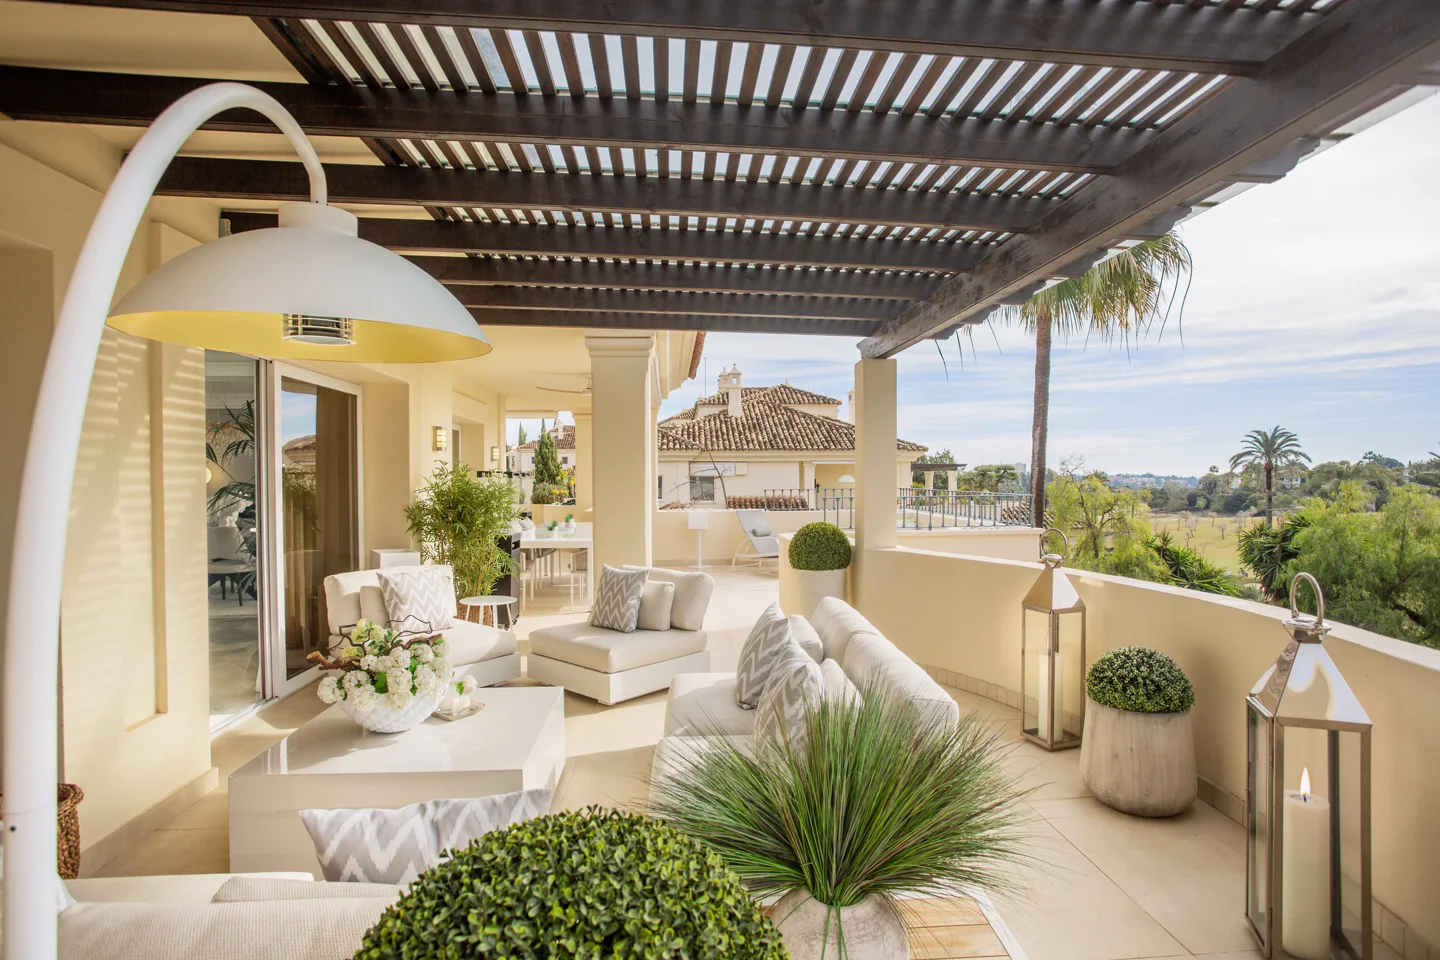 Nueva Andalucia: Stunning duplex penthouse with private pool overlooking the golf course